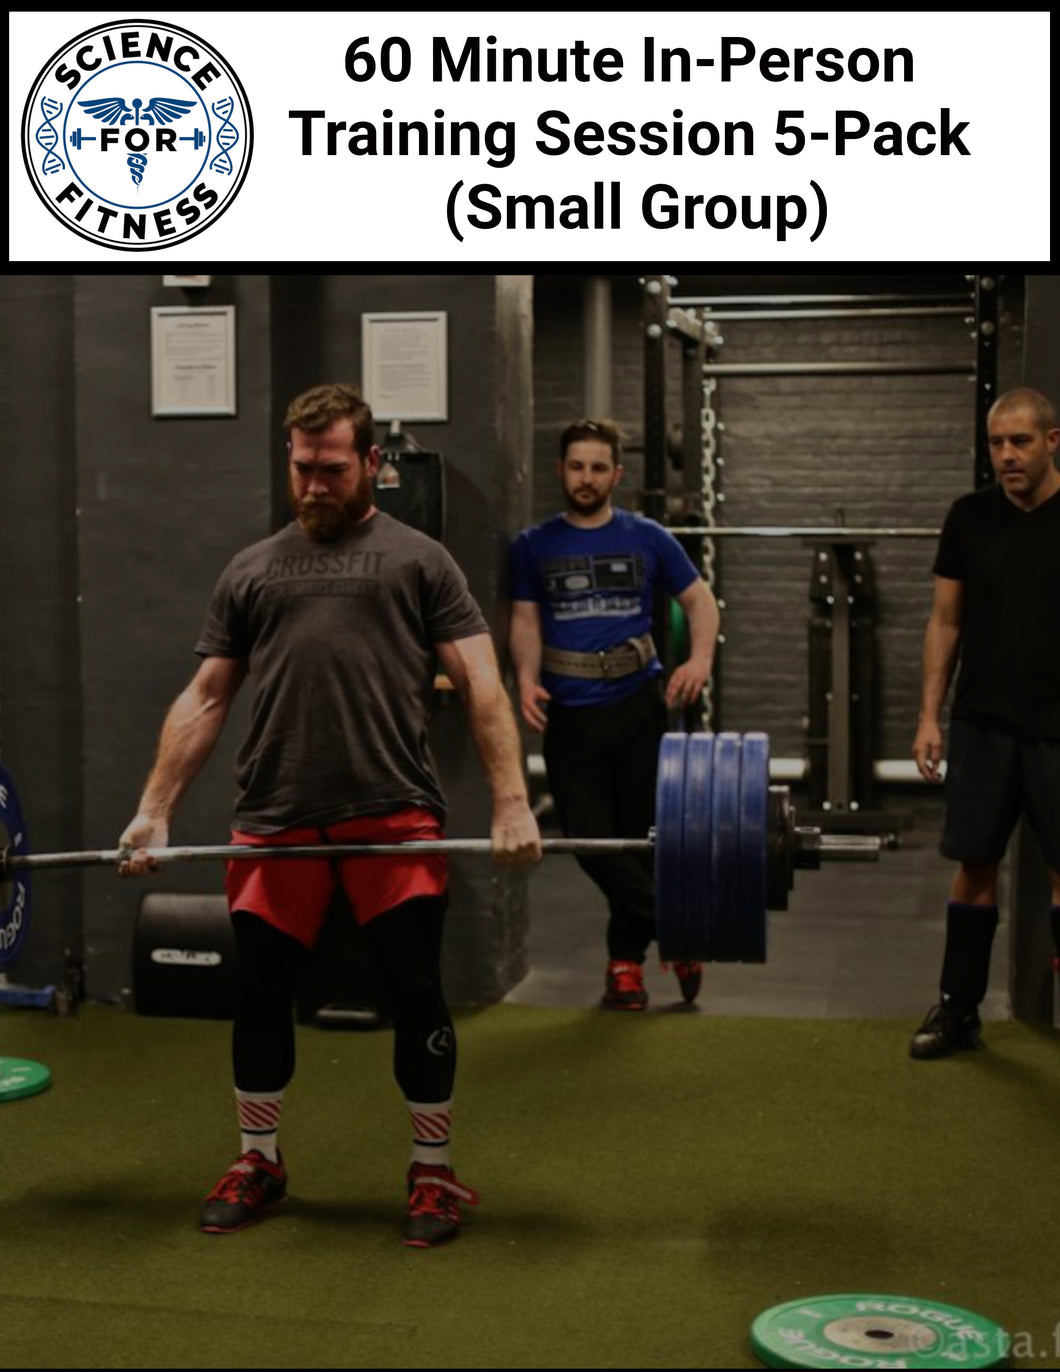 60 Min In-Person Training Session 5-Pack (Small Group)